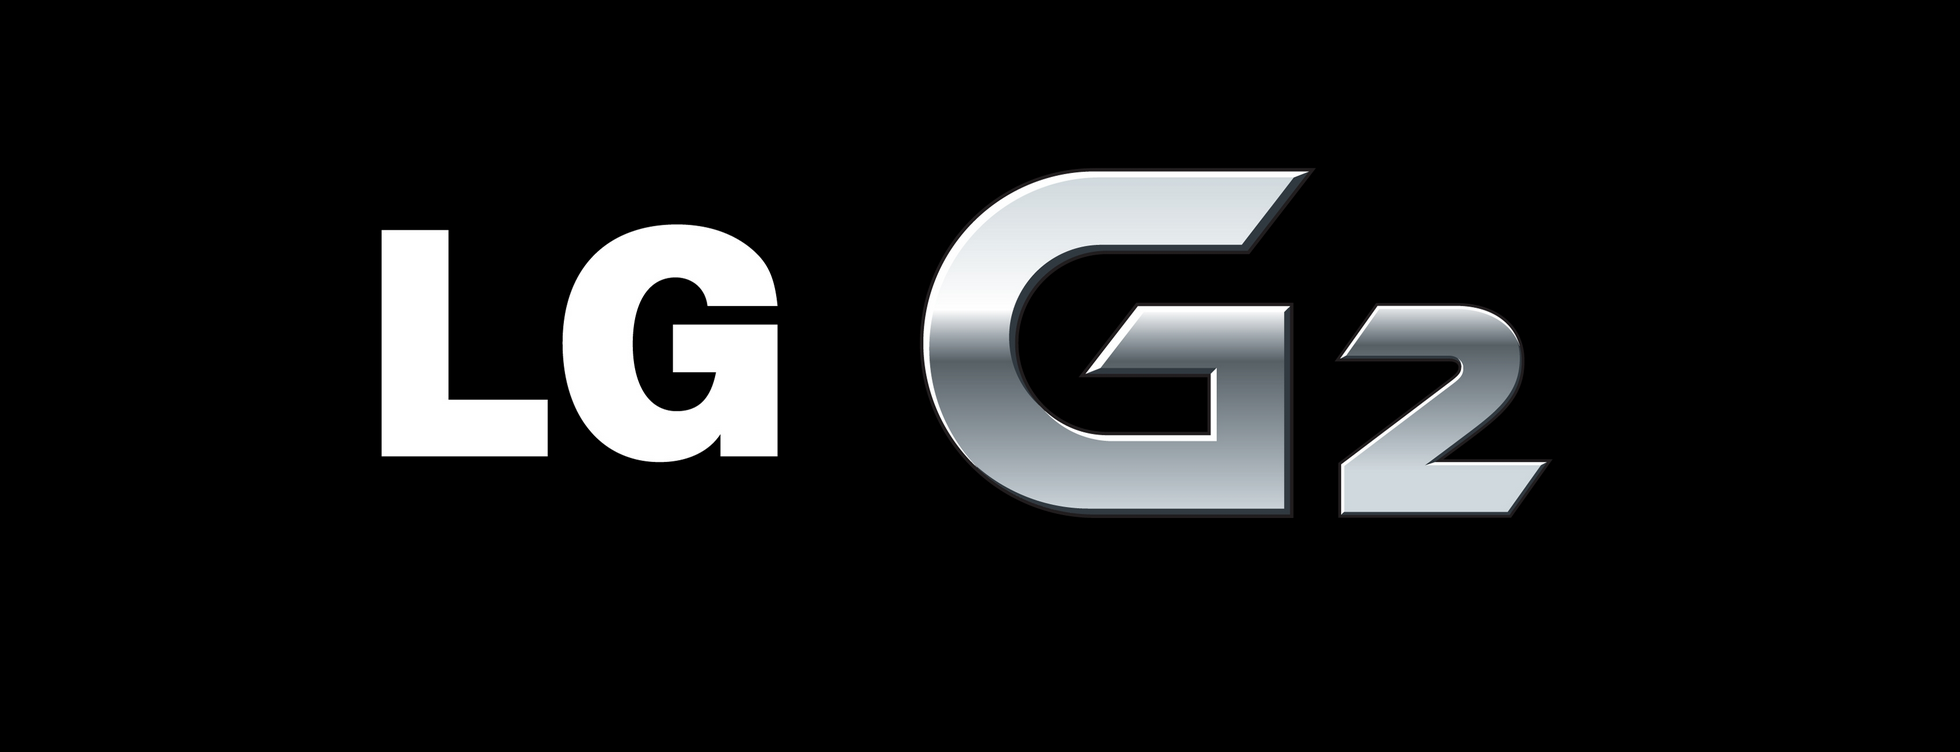 official lg names the lg g2 as the flagship optimus g successor ahead of august media event image 1